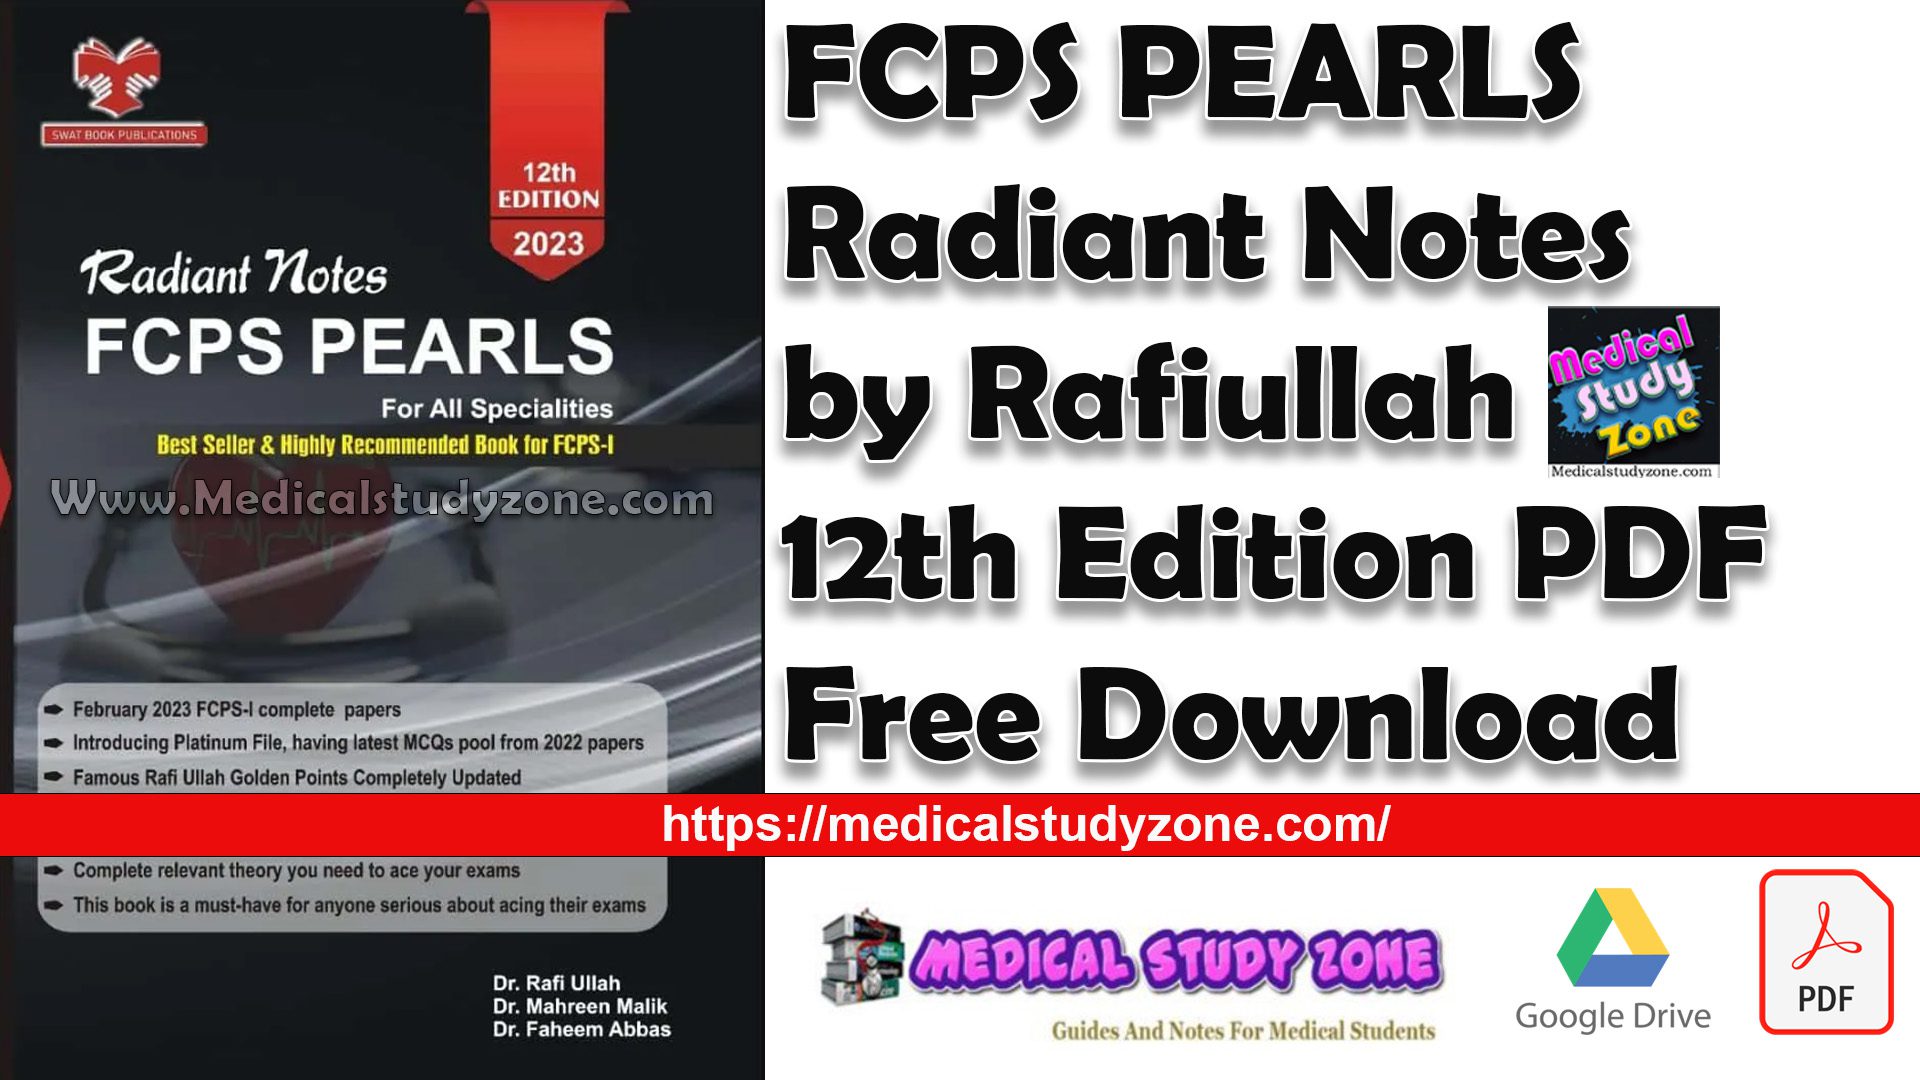 FCPS PEARLS Radiant Notes by Rafiullah 12th Edition PDF Free Download